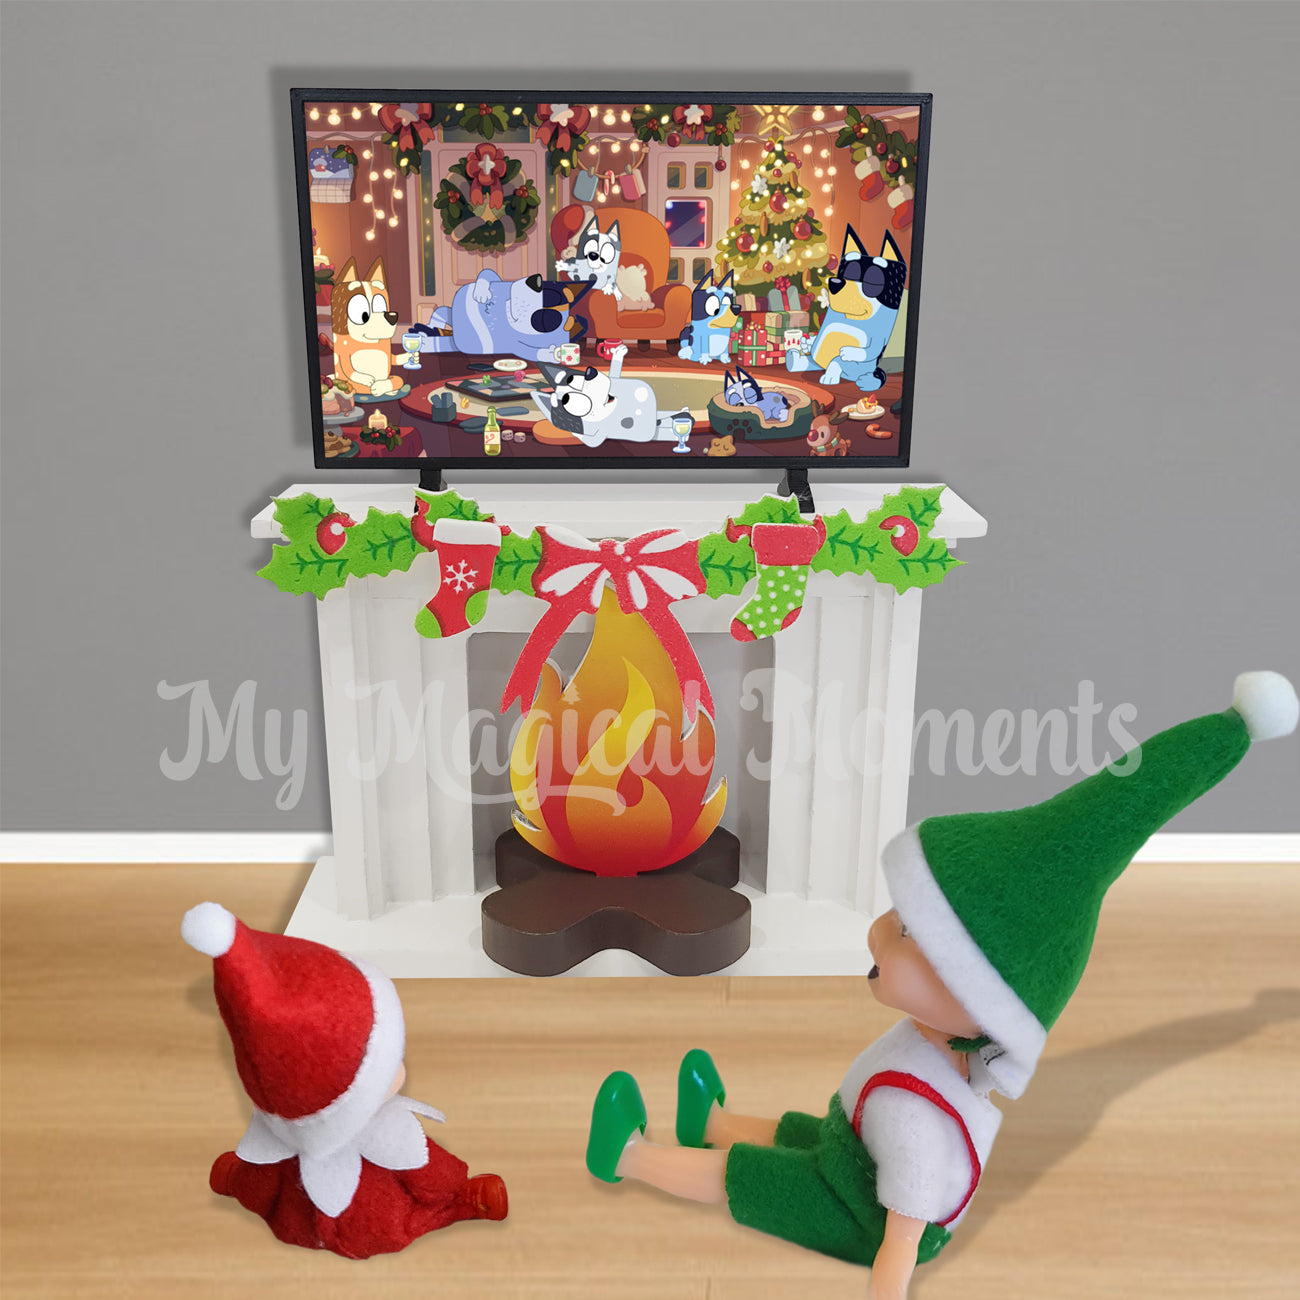 Elf toddler and elf baby watching a Christmas bluey episode on the elf tv.